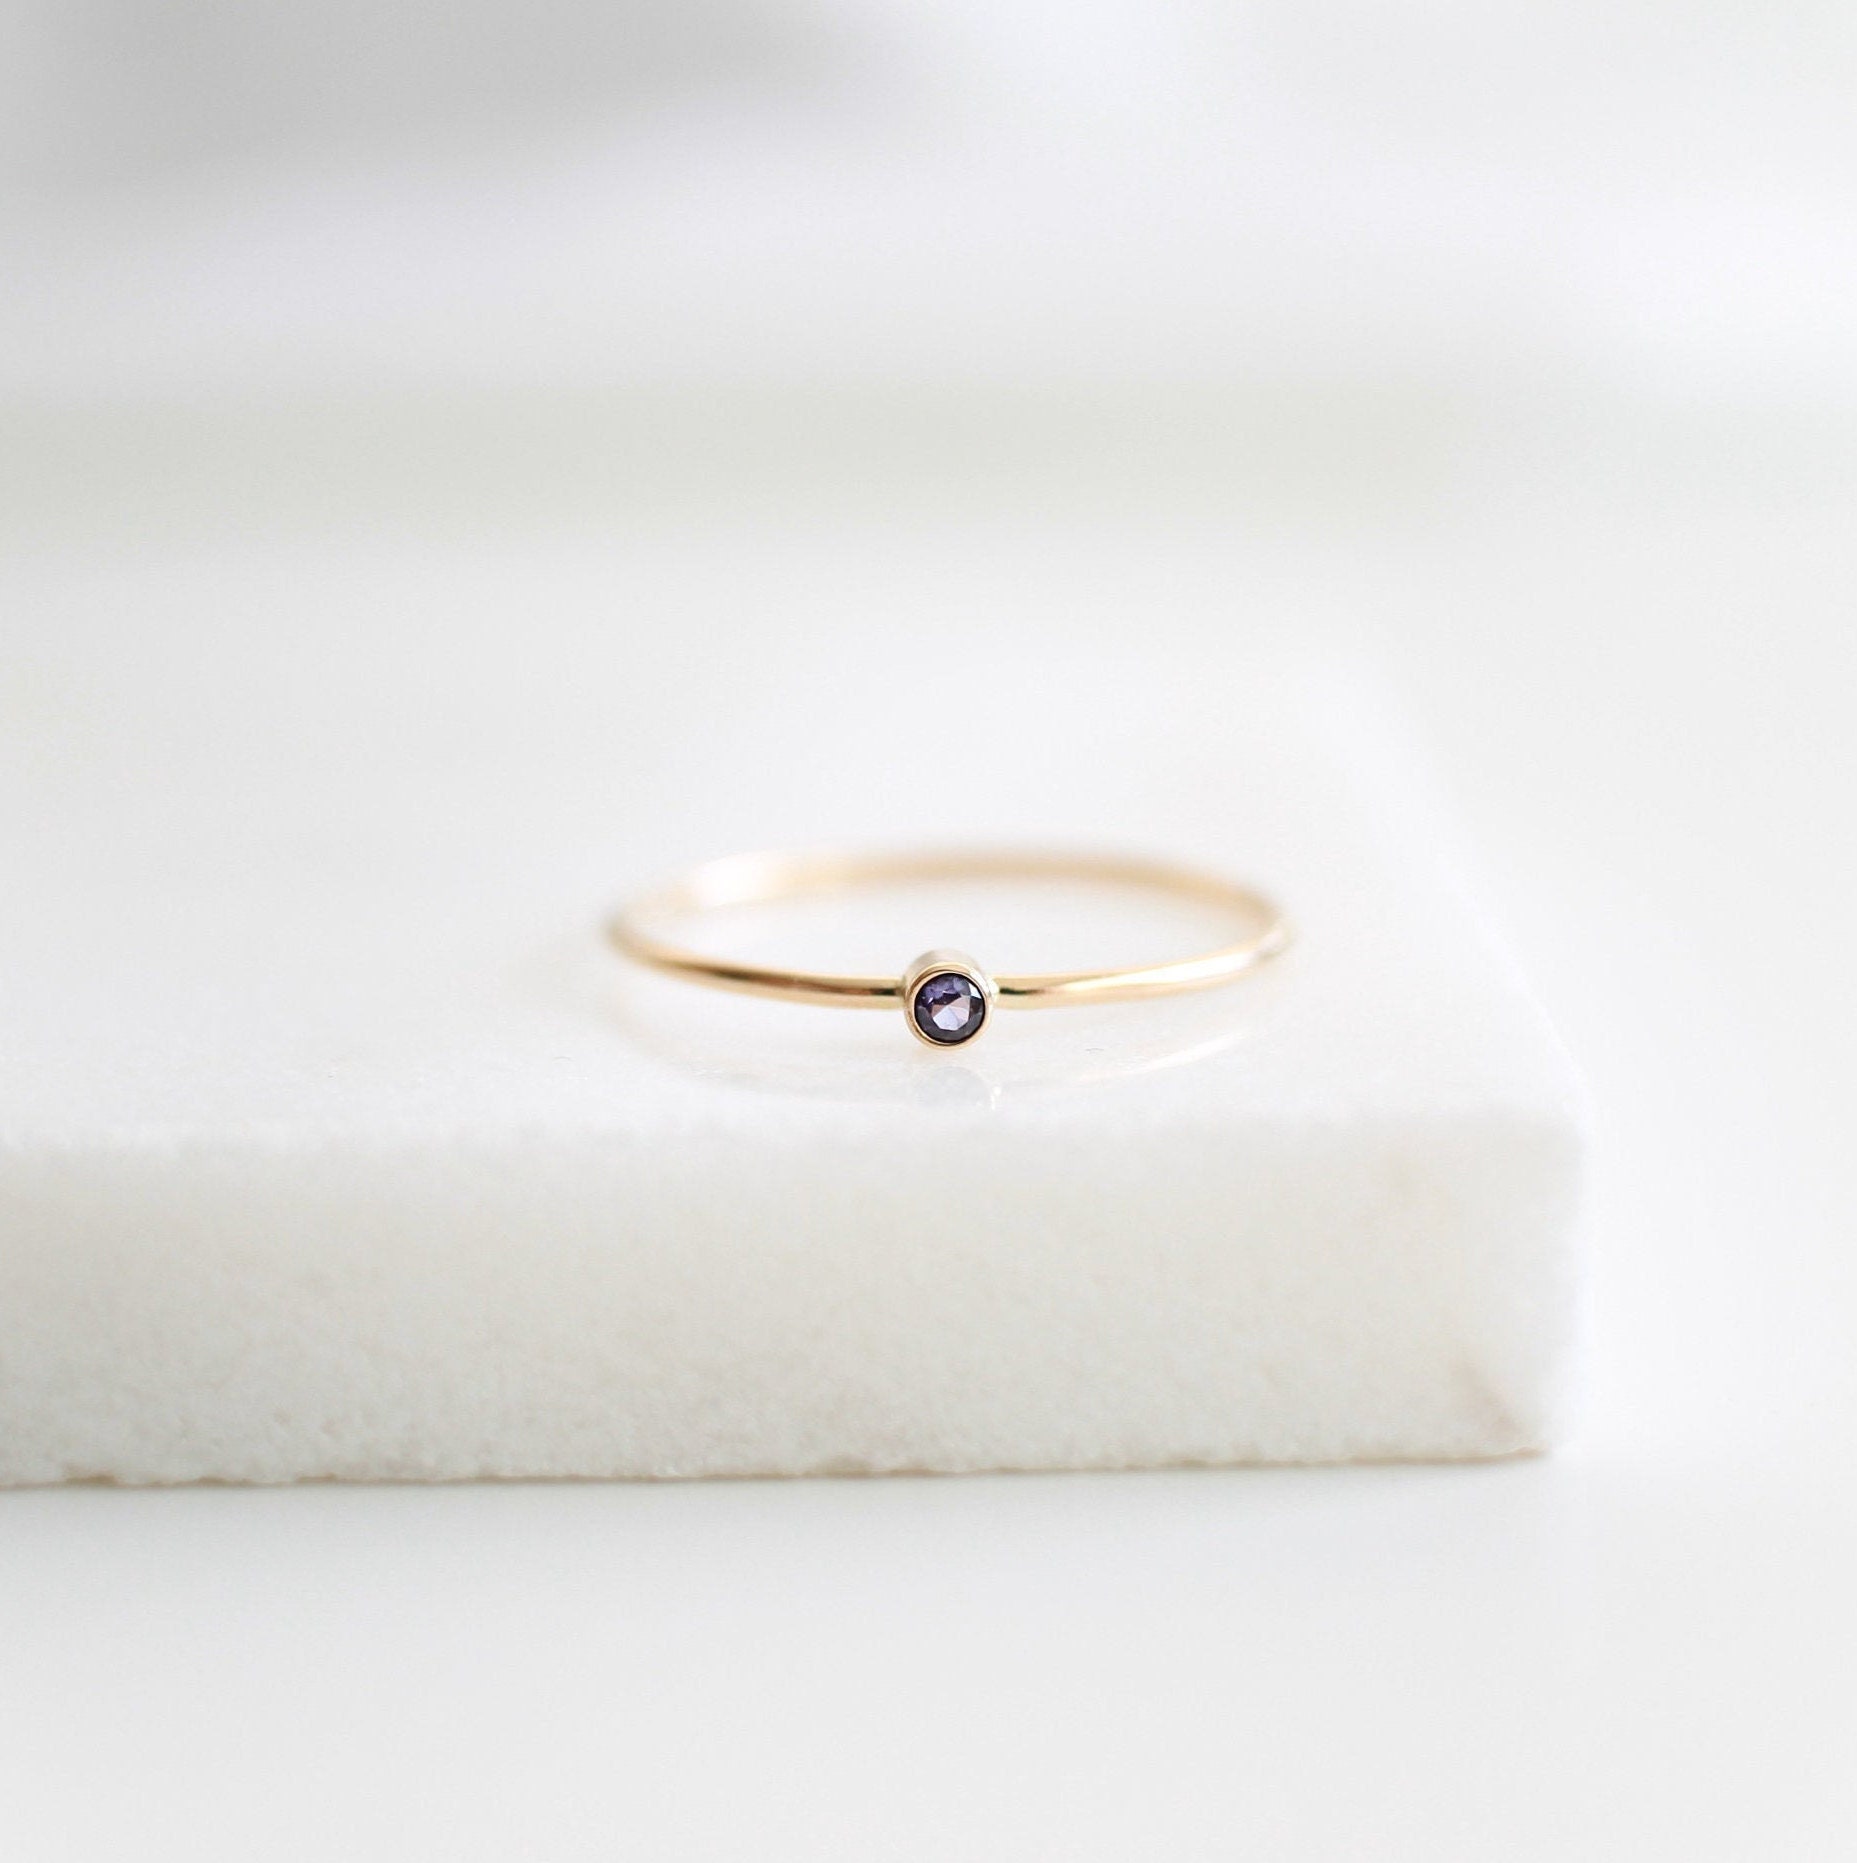 Tiny February Birthstone Ring - Amethyst Dainty Gold Gemstone Mothers Set Gift For Her Stacking Rings 2mm